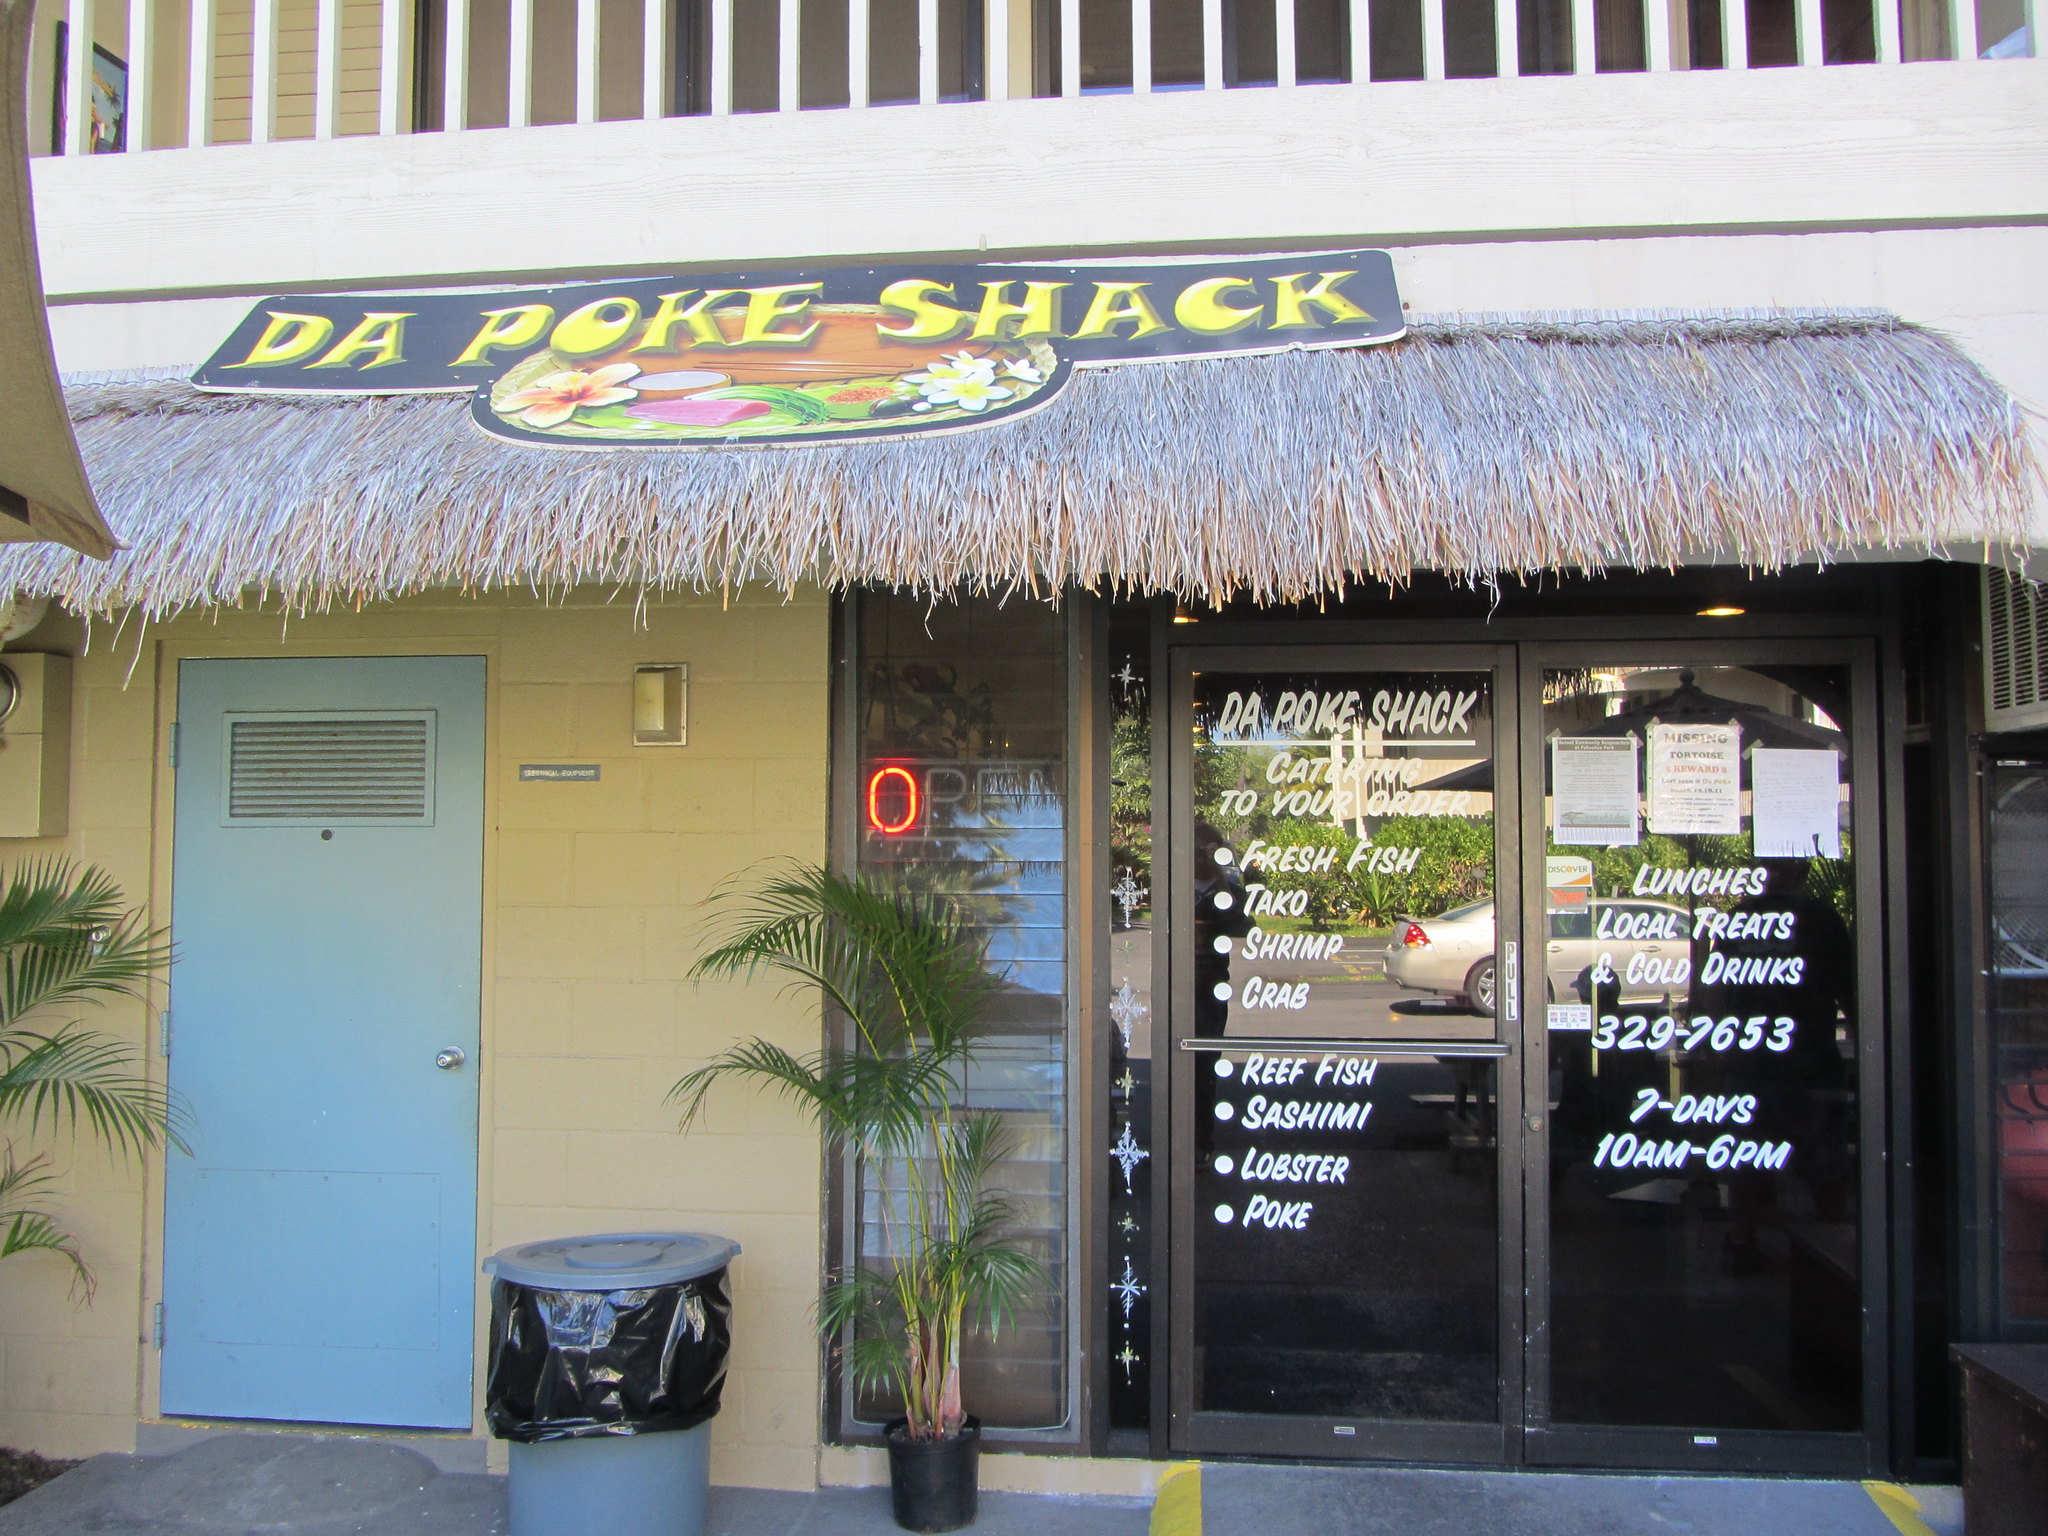 The classic native-themed storefront of Da Poke Shack, listed as one of the best restaurants in Kona, Hawaii, where featured dishes printed on tented glass door